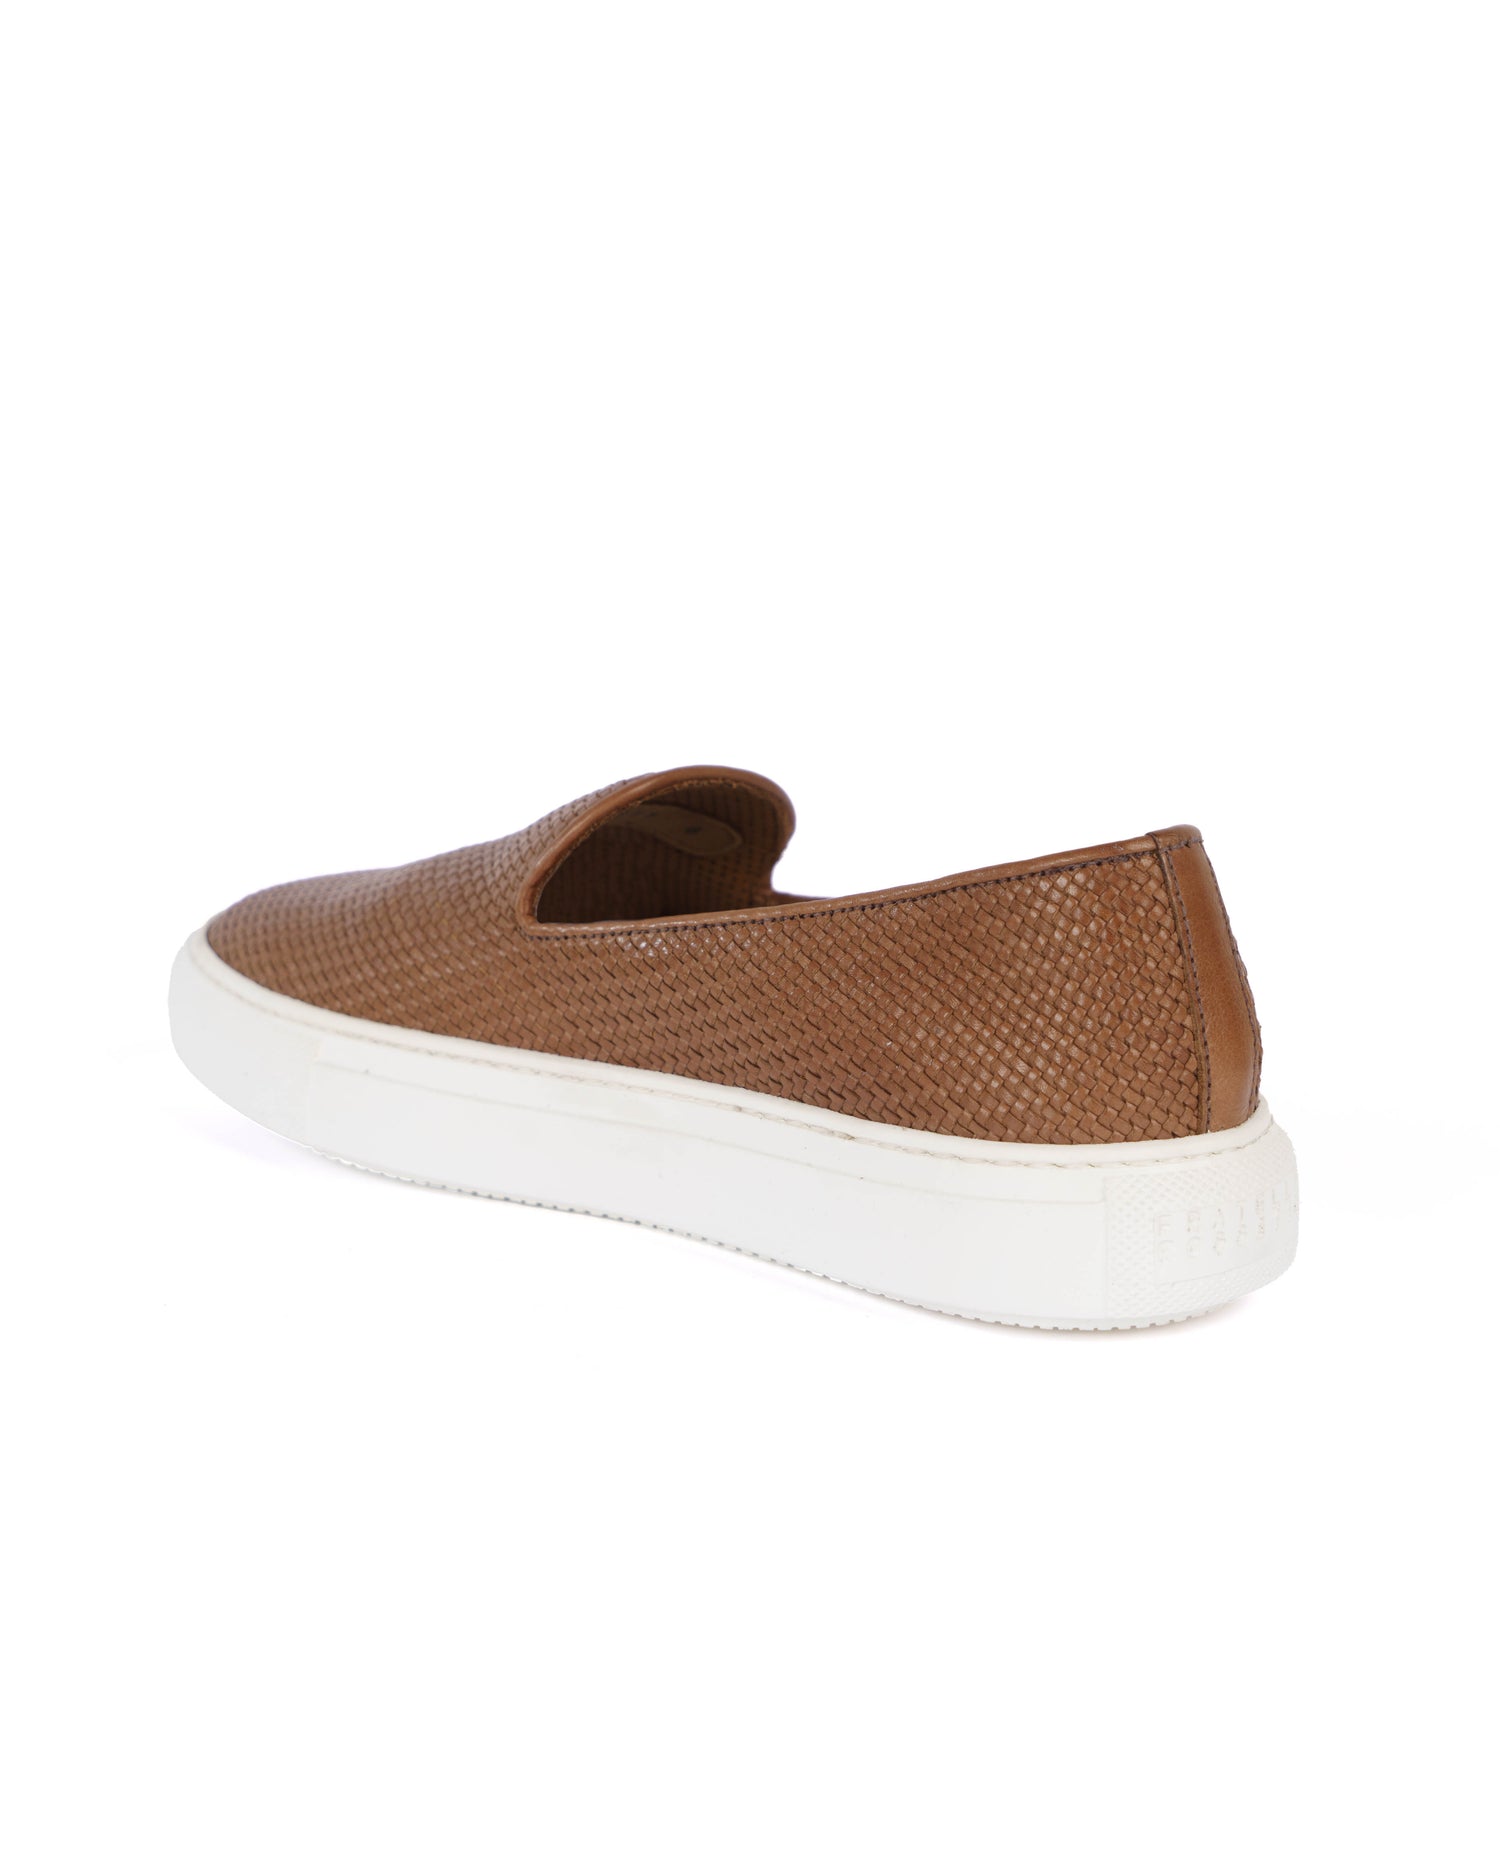 Brown Slip On Shoes